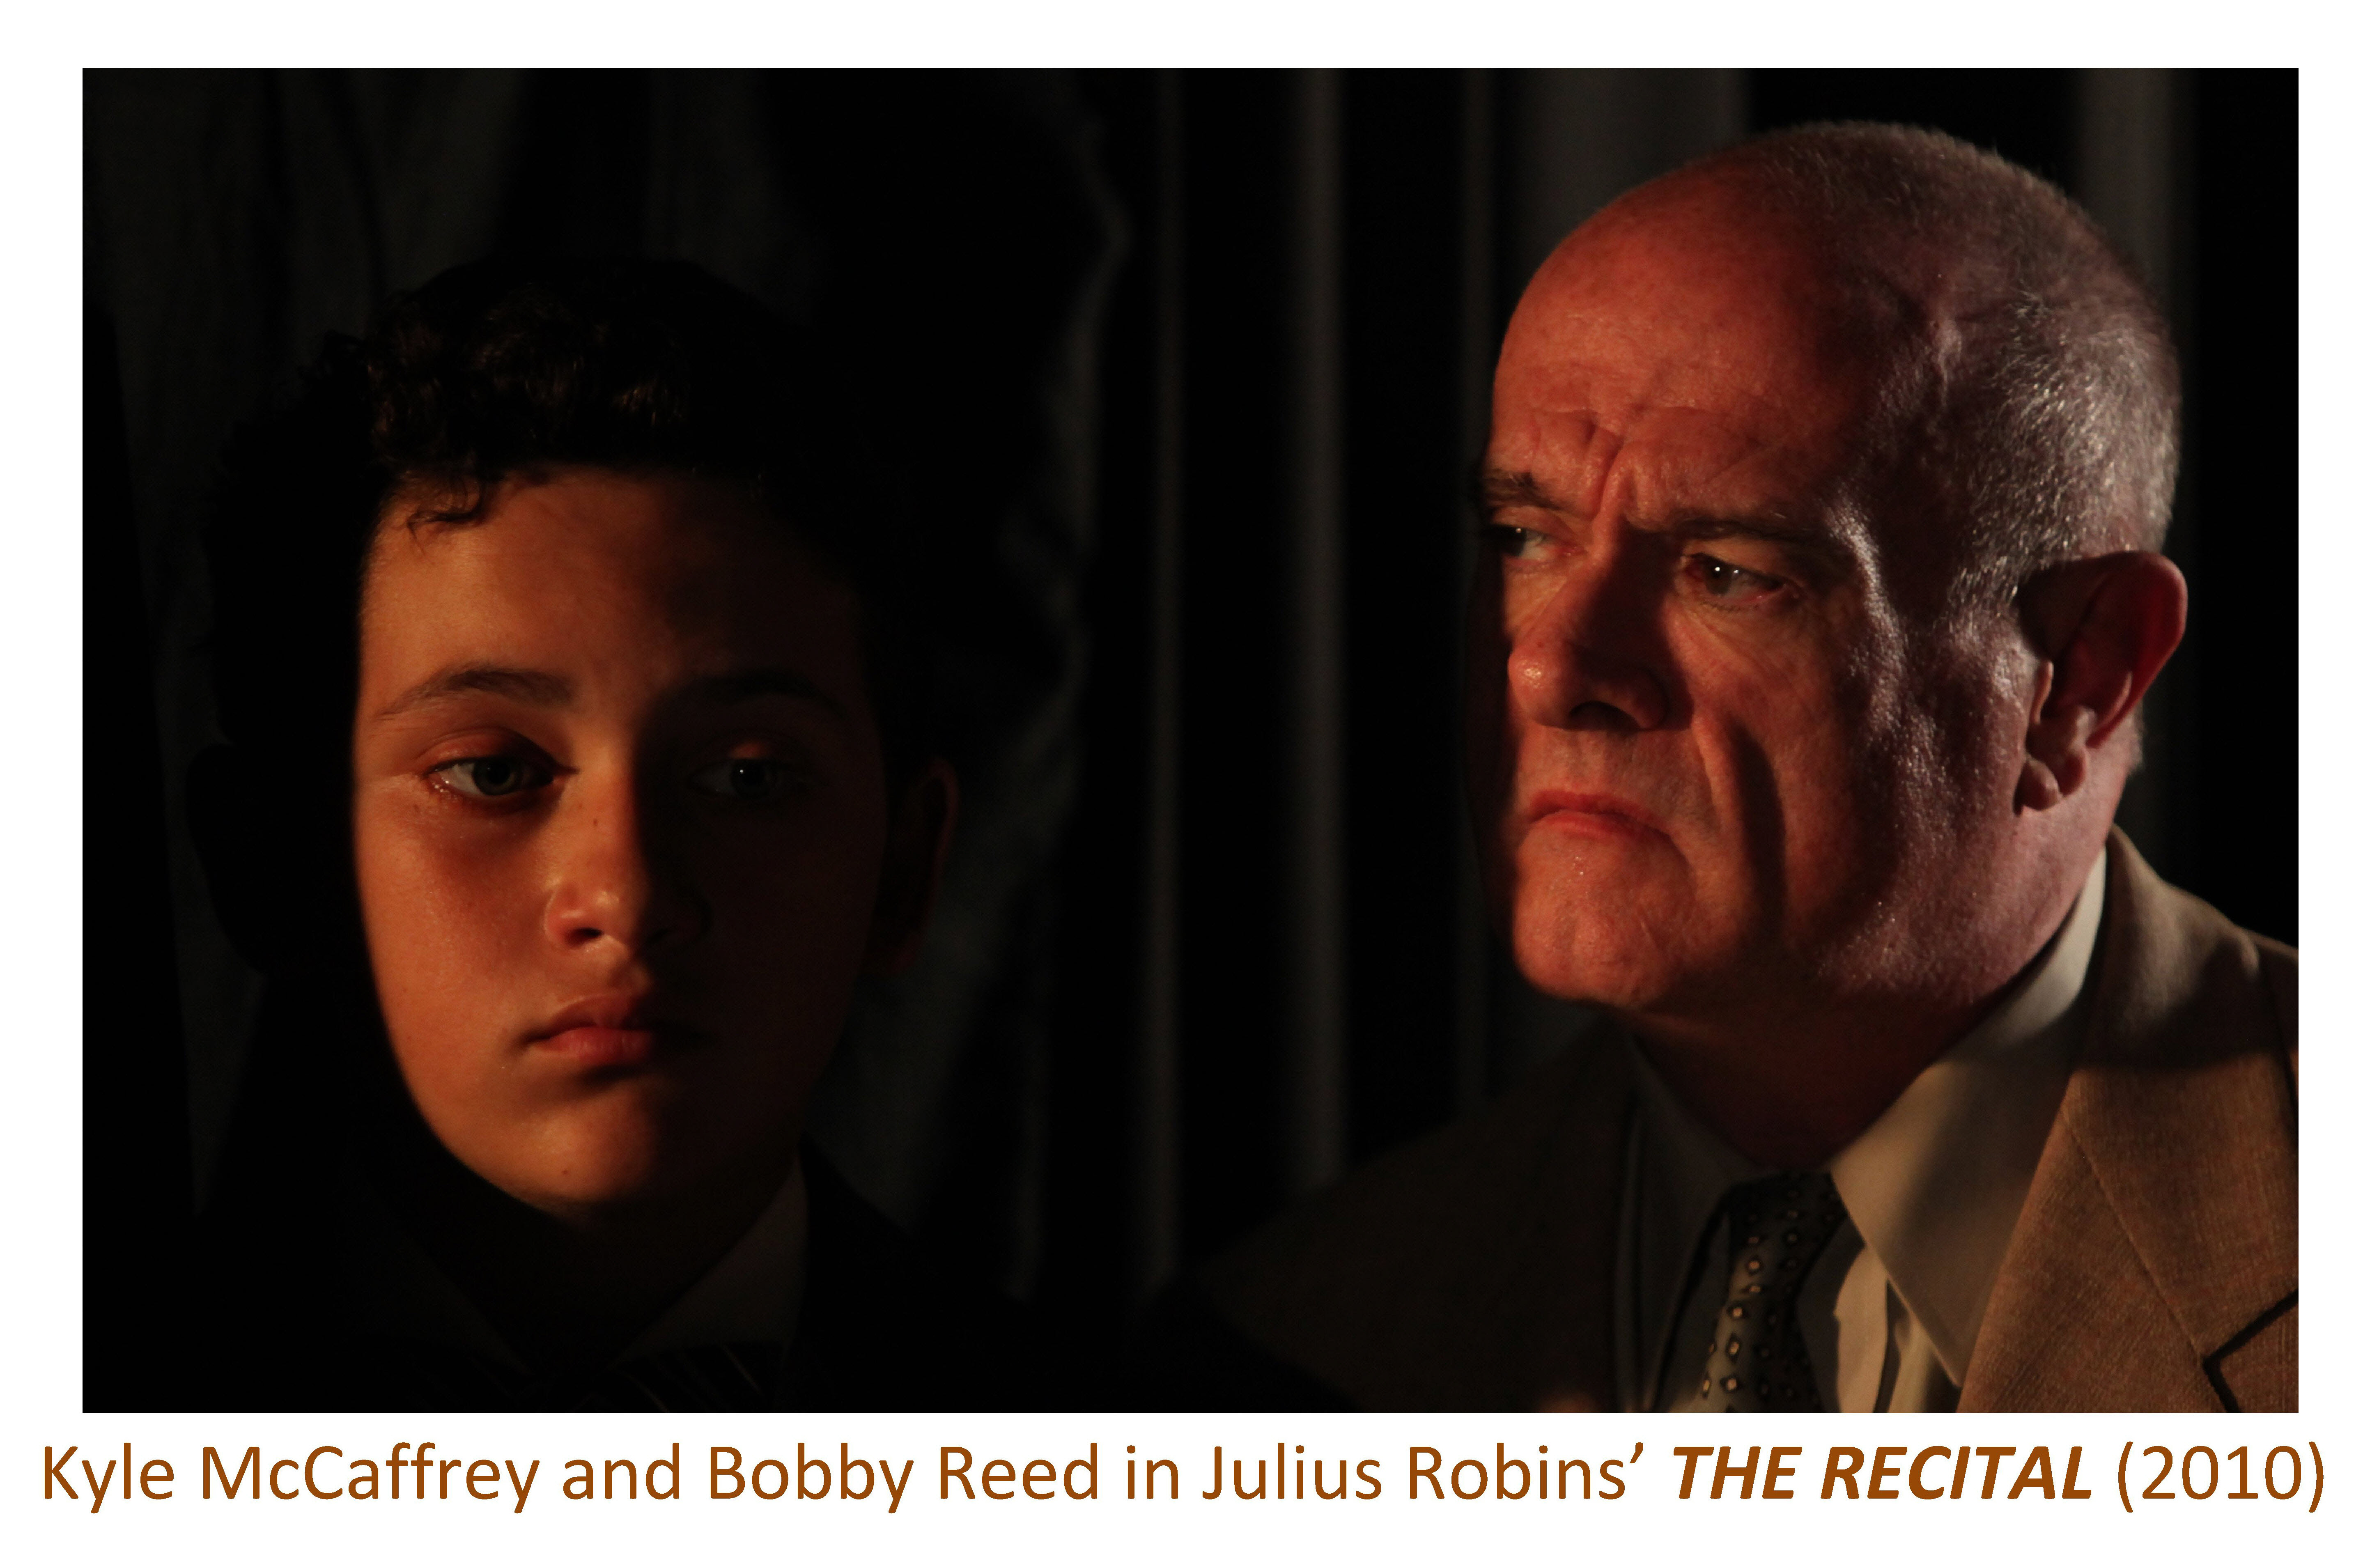 Kyle McCaffrey and Bobby Reed in Julius Robins THE RECITAL (2010)